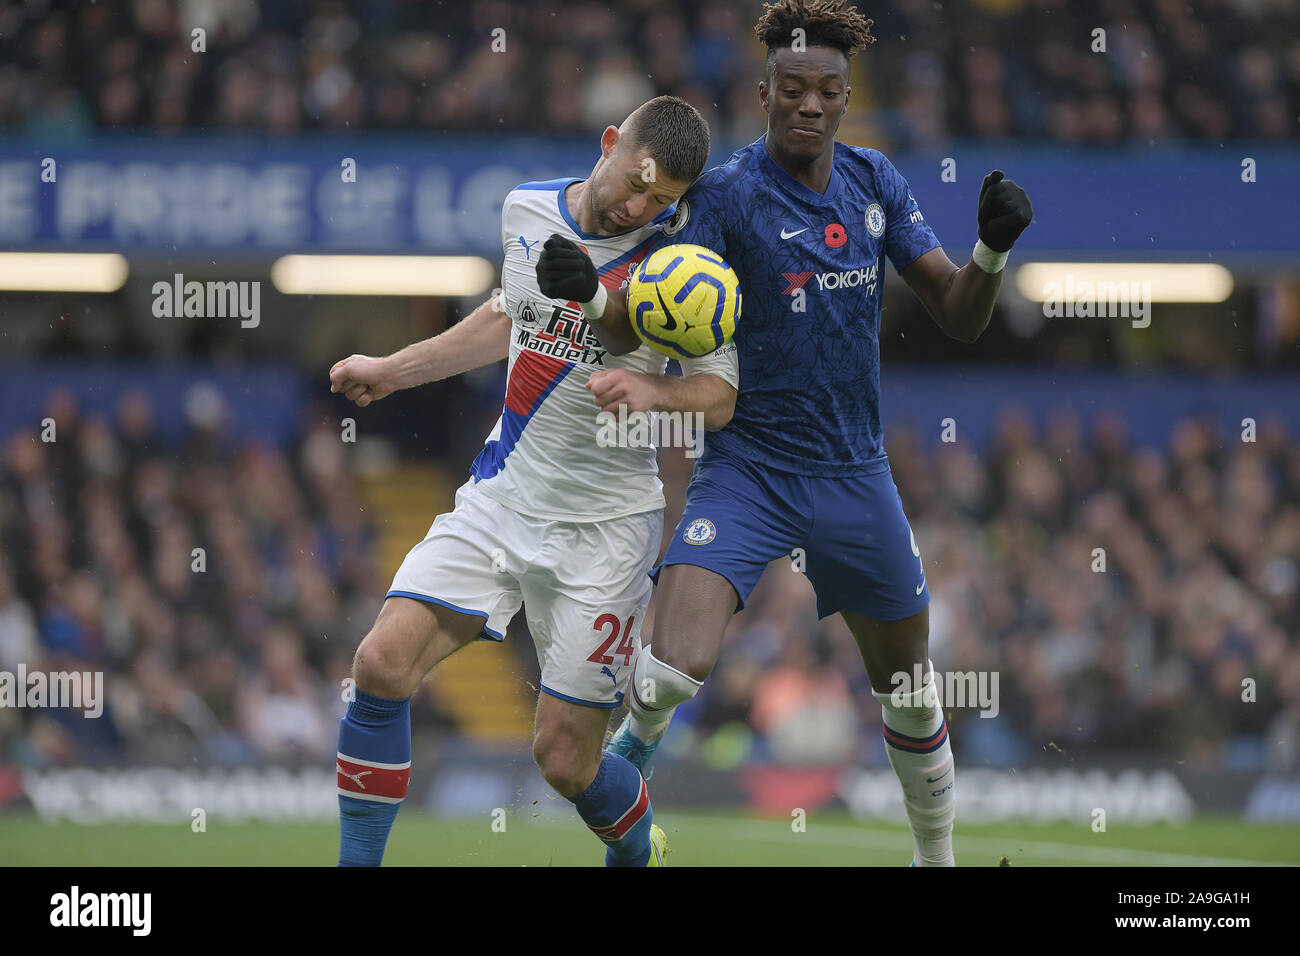 Tammy Abraham of Chelsea clashes with Gary Cahill Crystal Palace during the Chelsea vs Crystal Palace Premier League match at Stamford Bridge -Editori Stock Photo